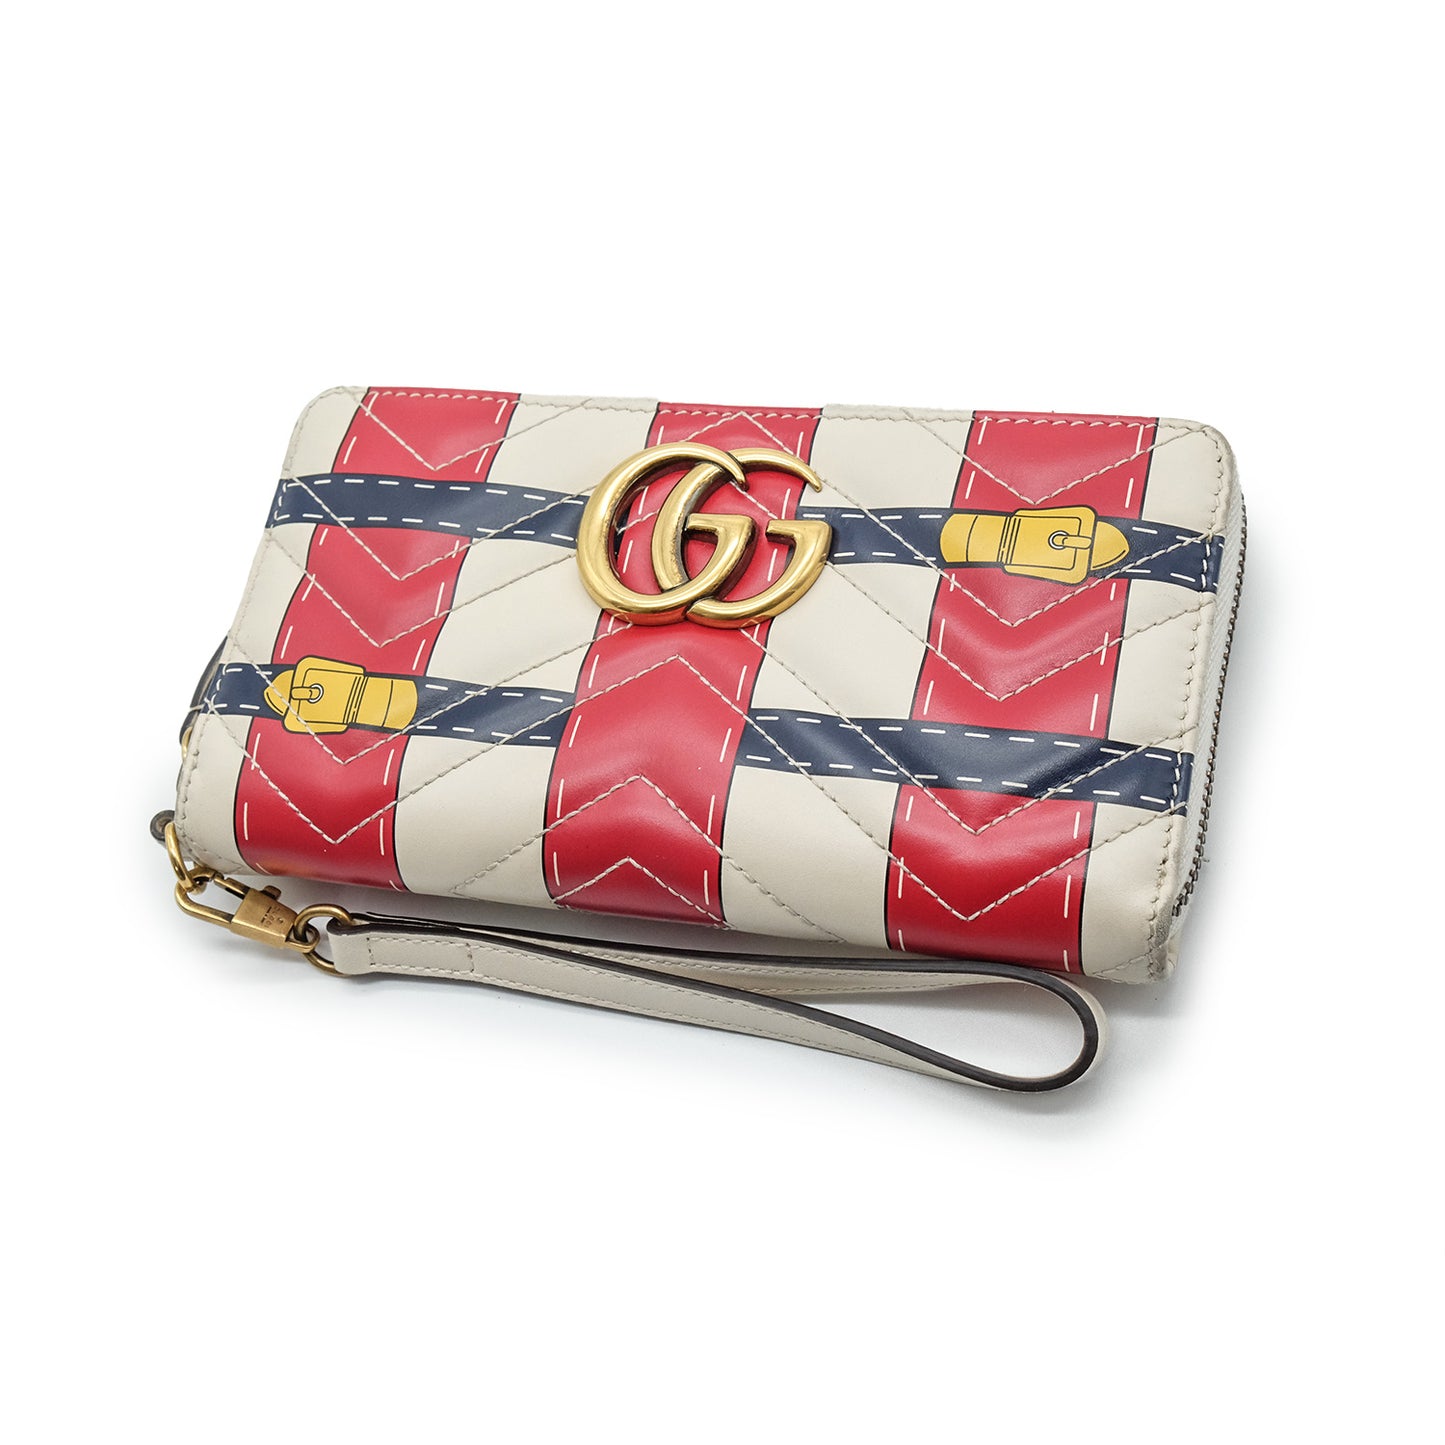 GG Marmont Continental Long Wallet